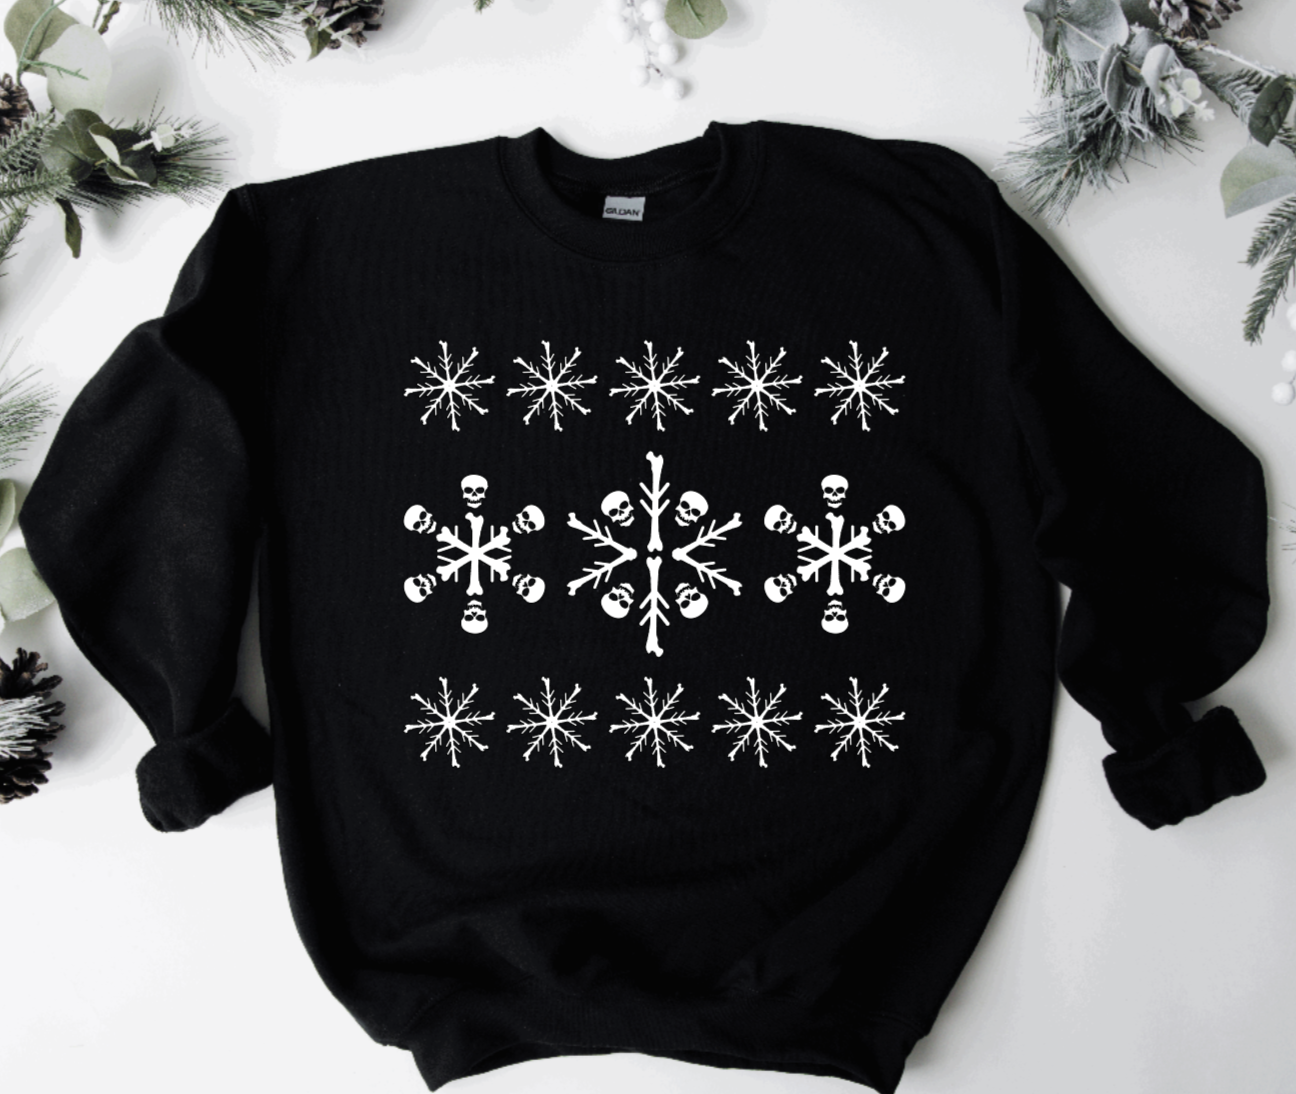 sweatshirt with snowflake pattern on it that&#x27;s made up of skulls and bones once you look closely at it